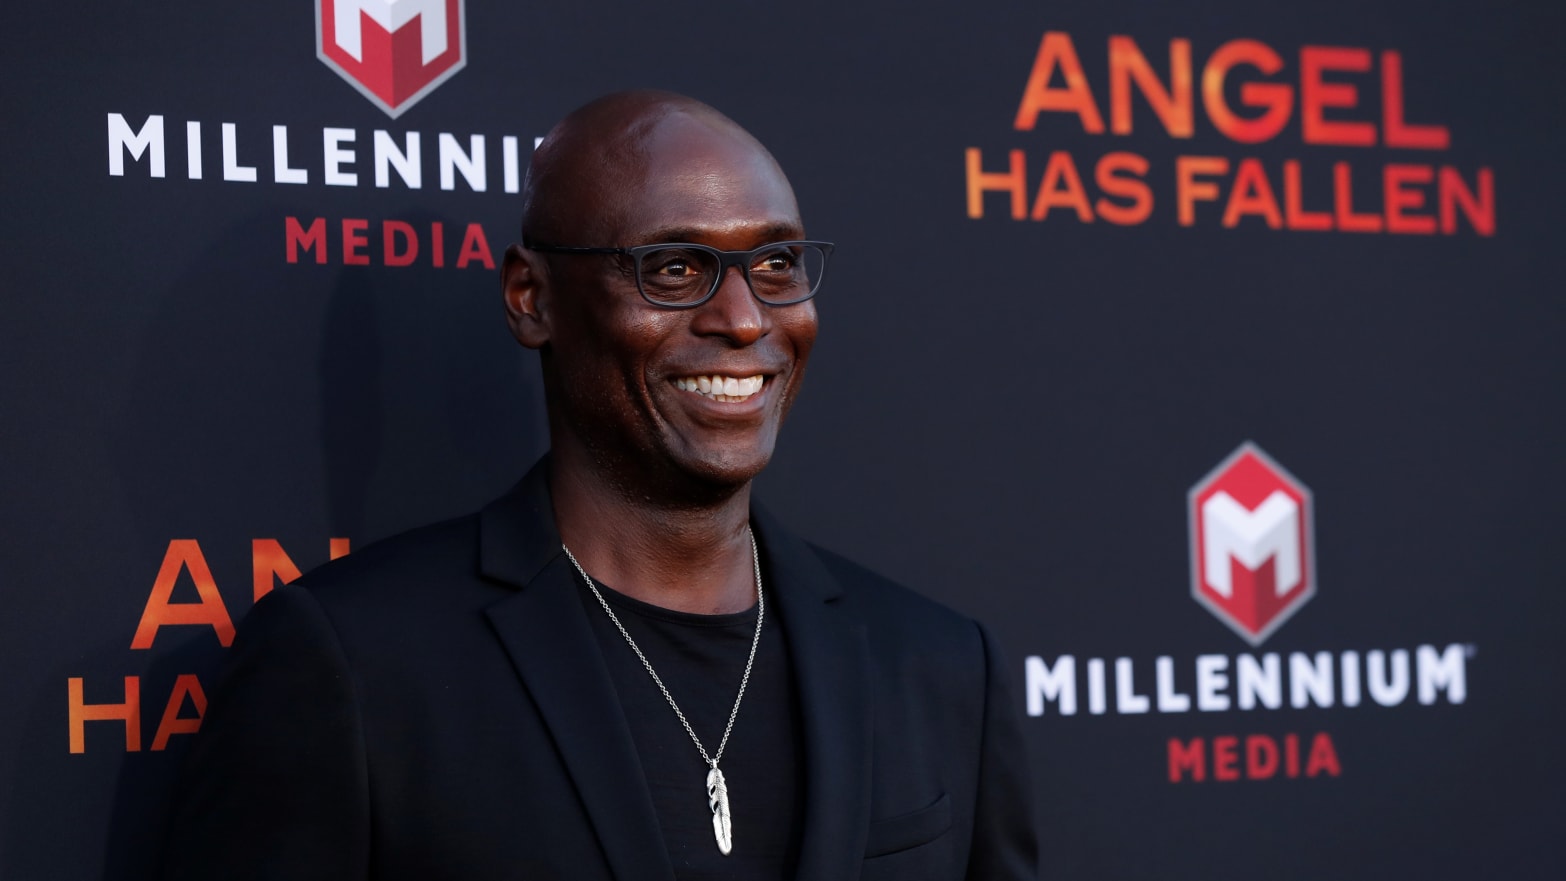 Lance Reddick cause of death: Star of The Wire and John Wick dies